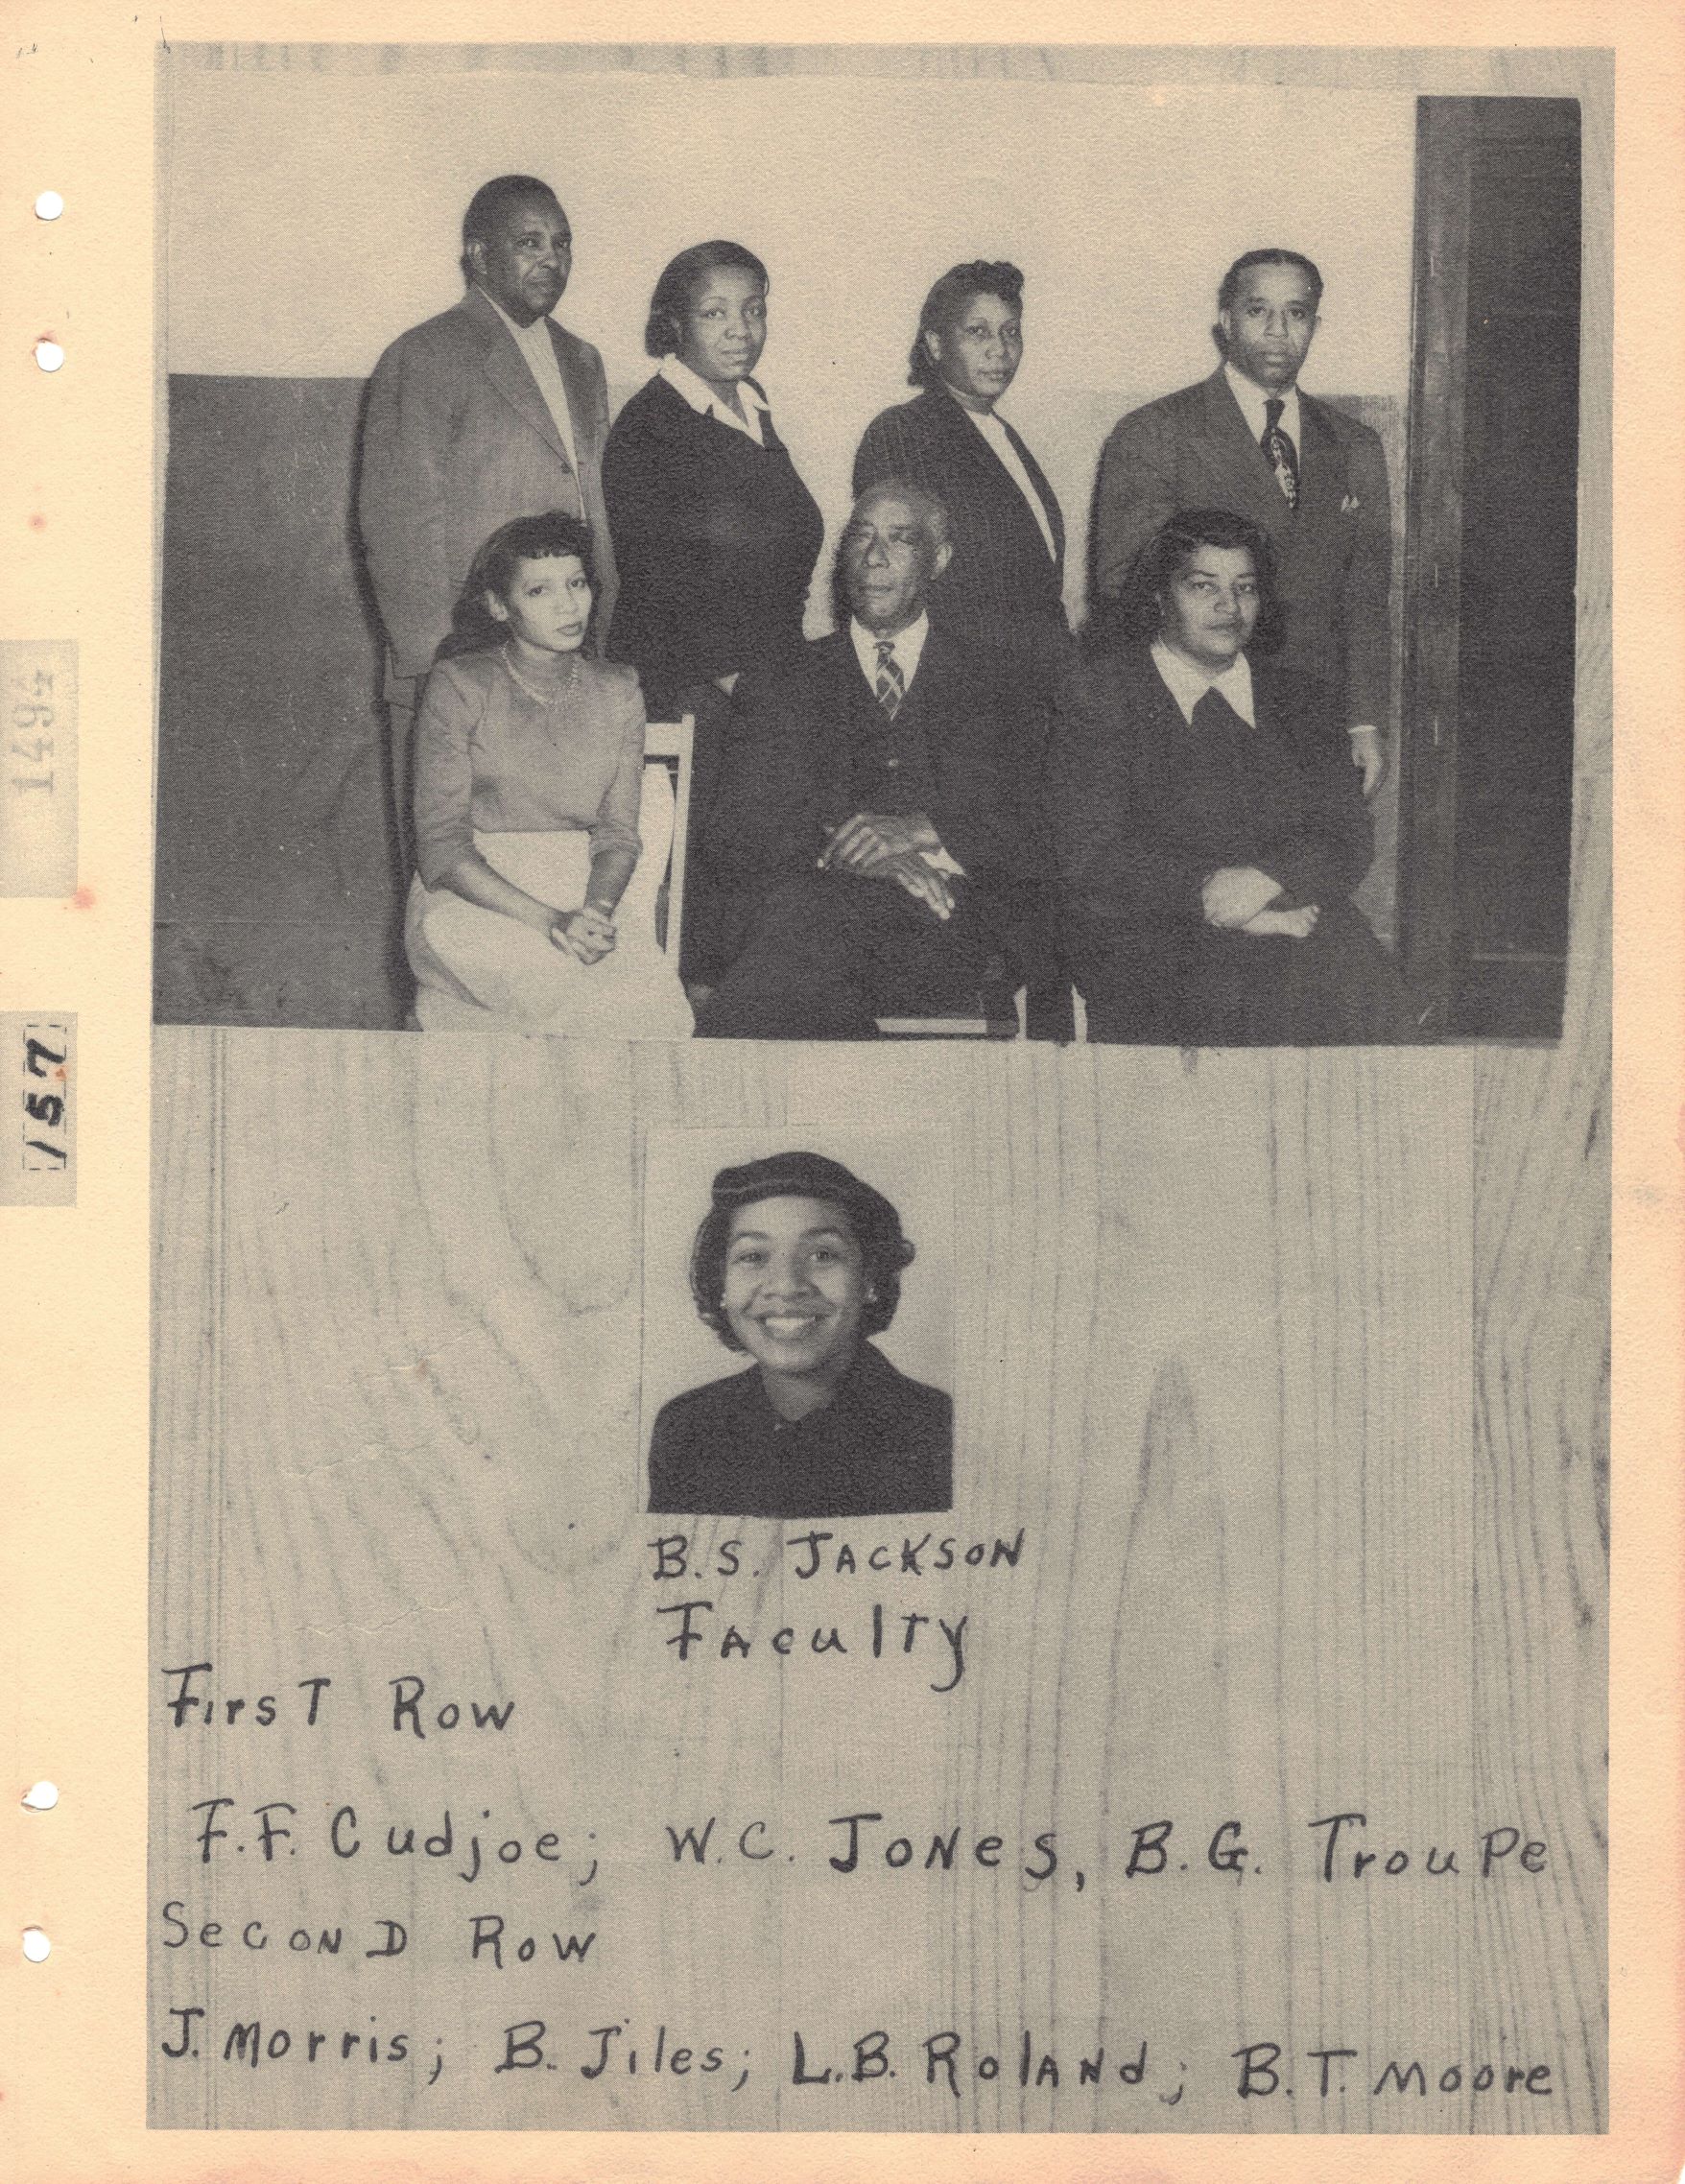 Group of people, four standing and three sitting, and headshot of woman